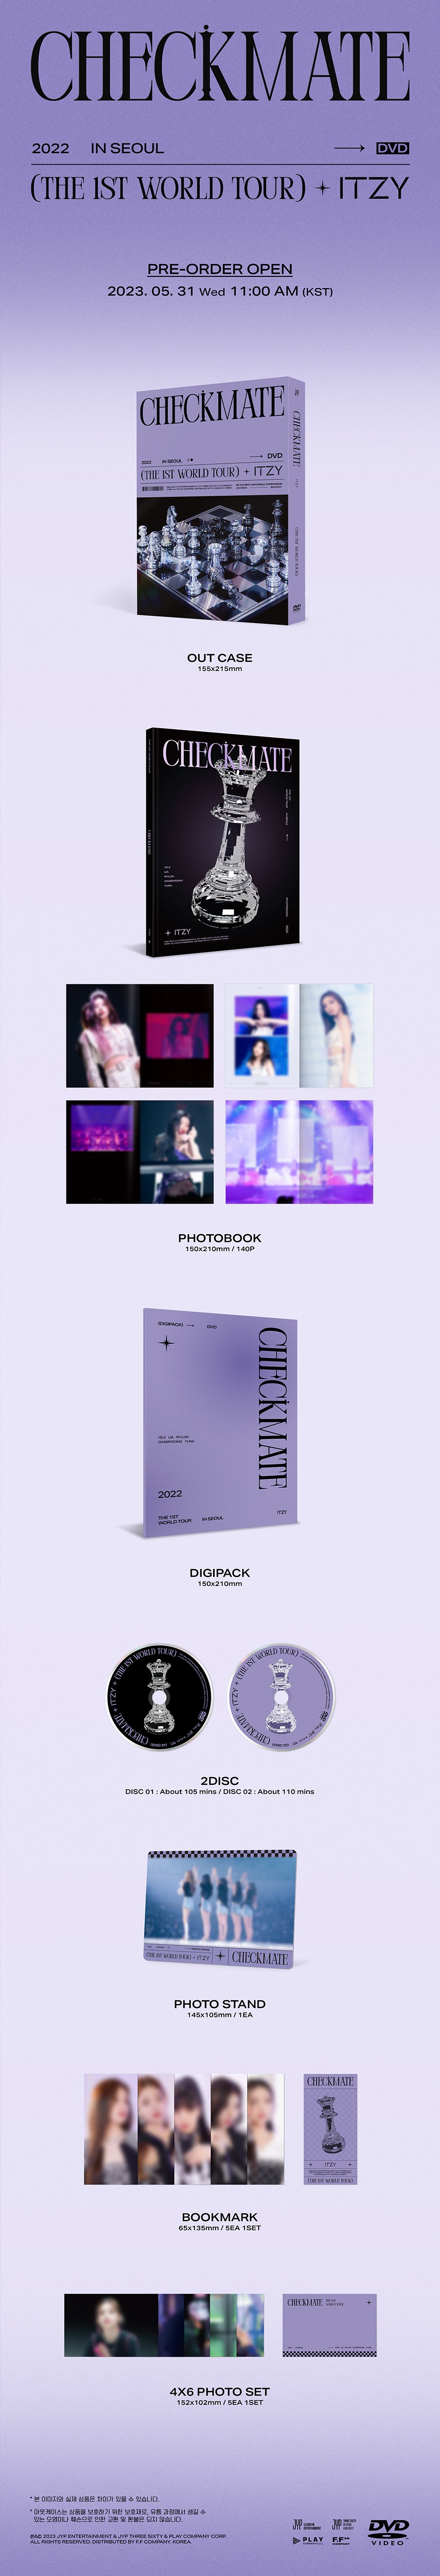 ITZY 2022 THE 1ST WORLD TOUR IN SEOUL 'CHECKMATE' (DVD) DETAIL